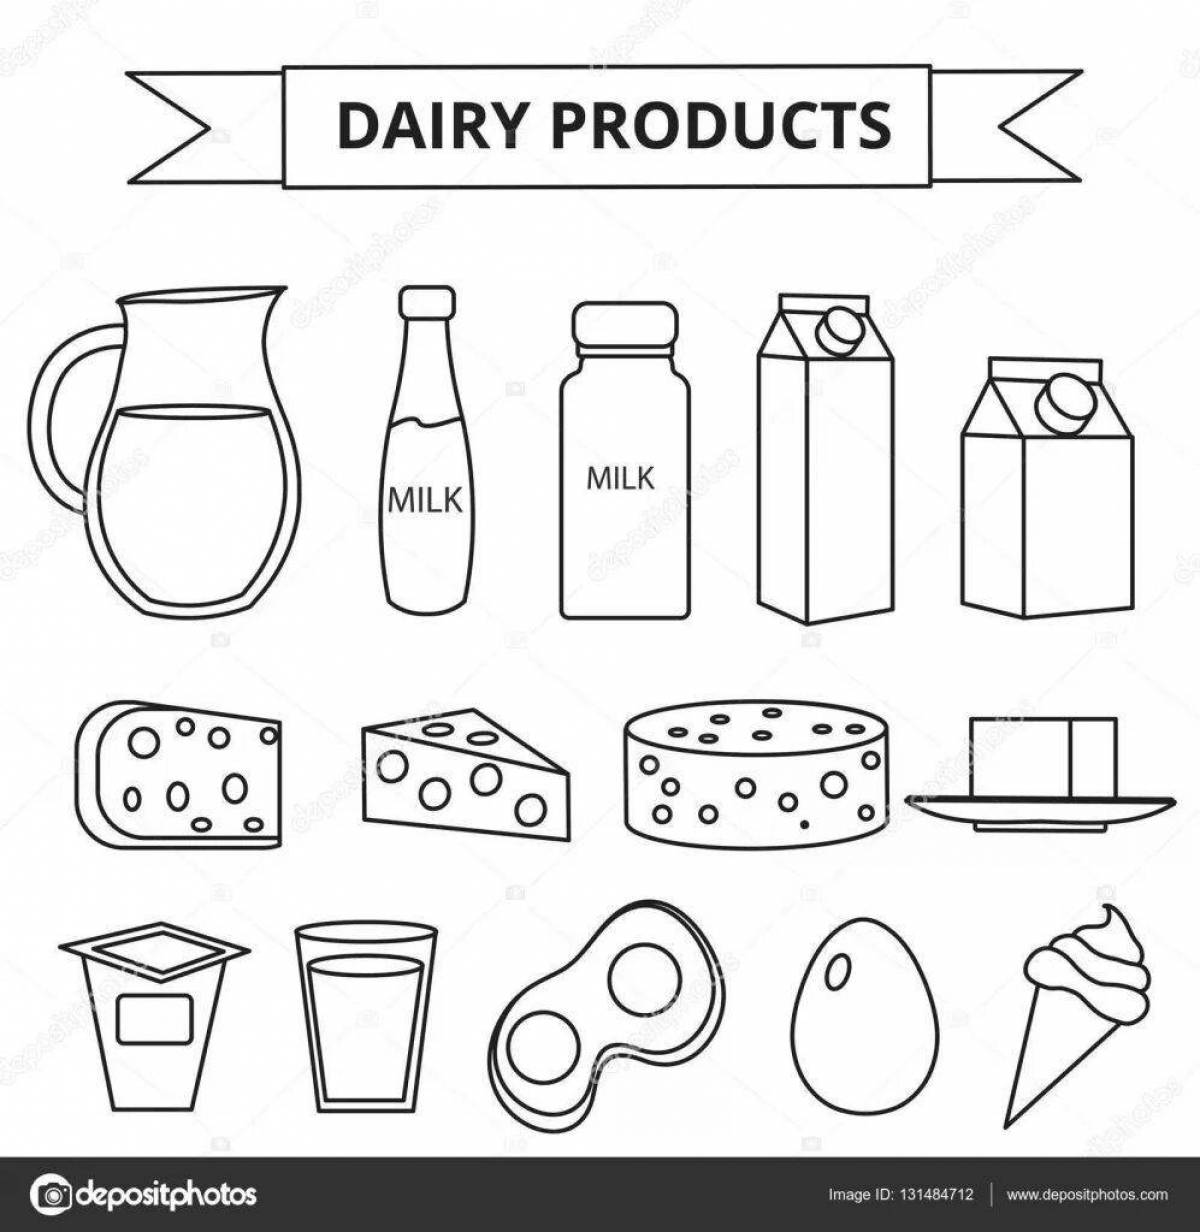 Dairy products #7